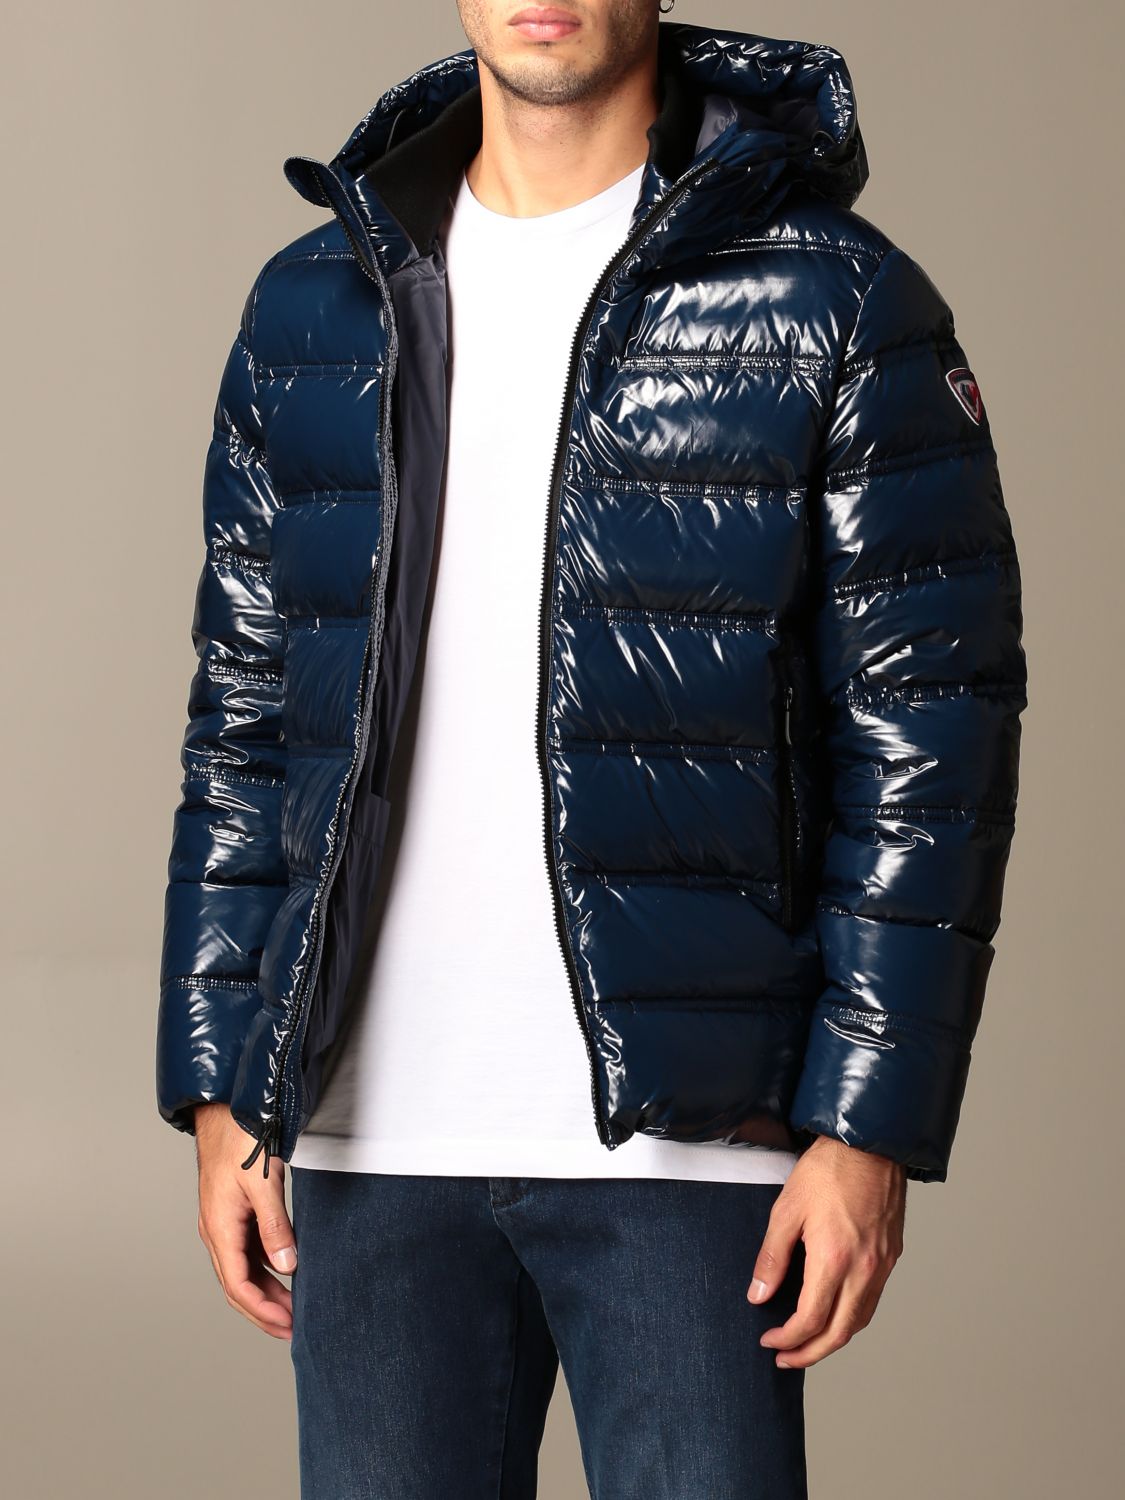 Rossignol Outlet: Cesar sh down jacket in shiny nylon | Jacket ...